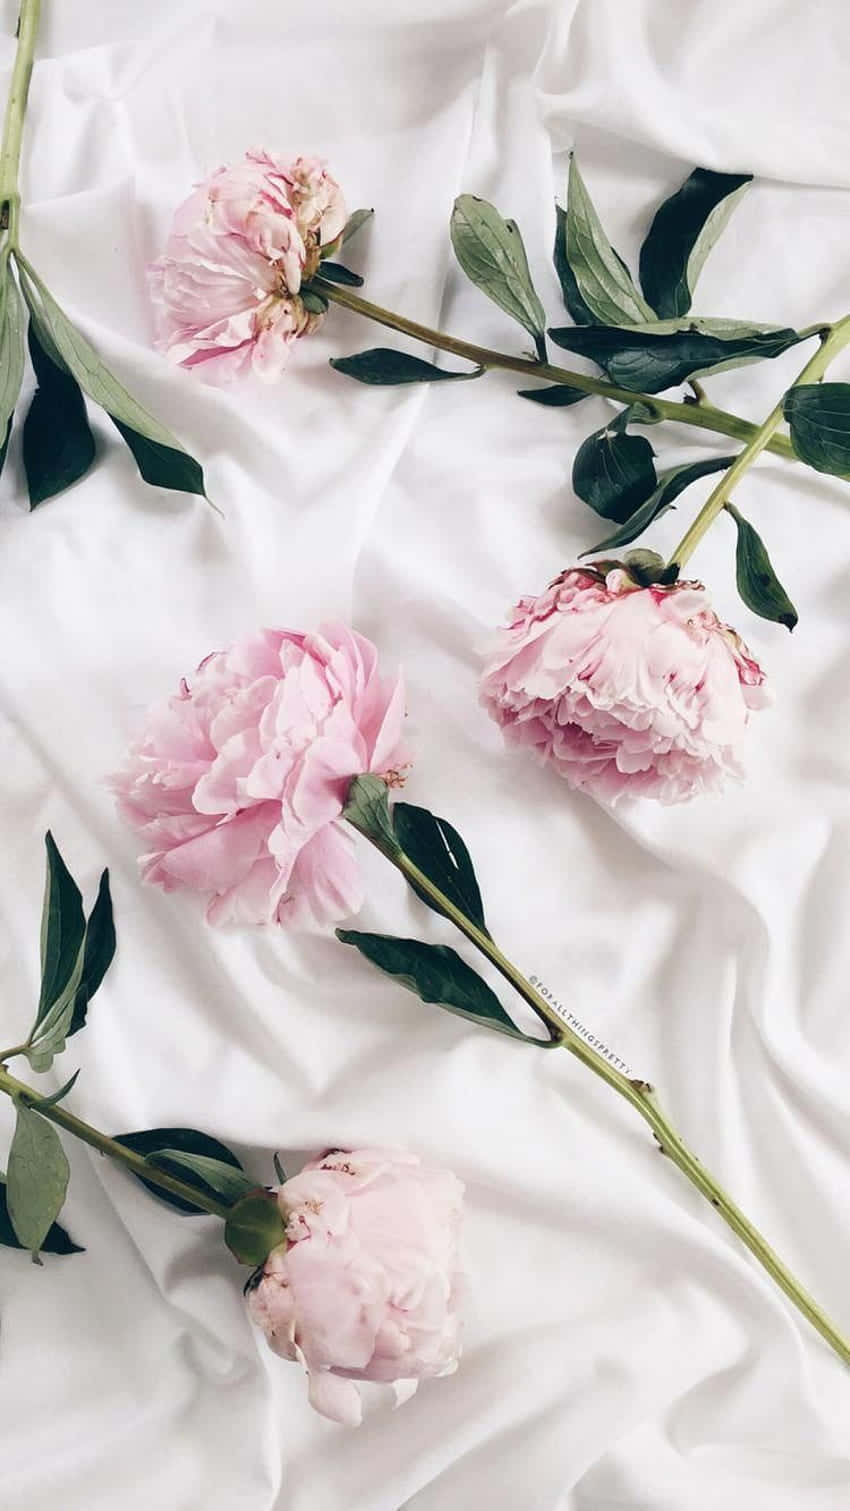 Stay trendy with a pink Tumblr-inspired background.